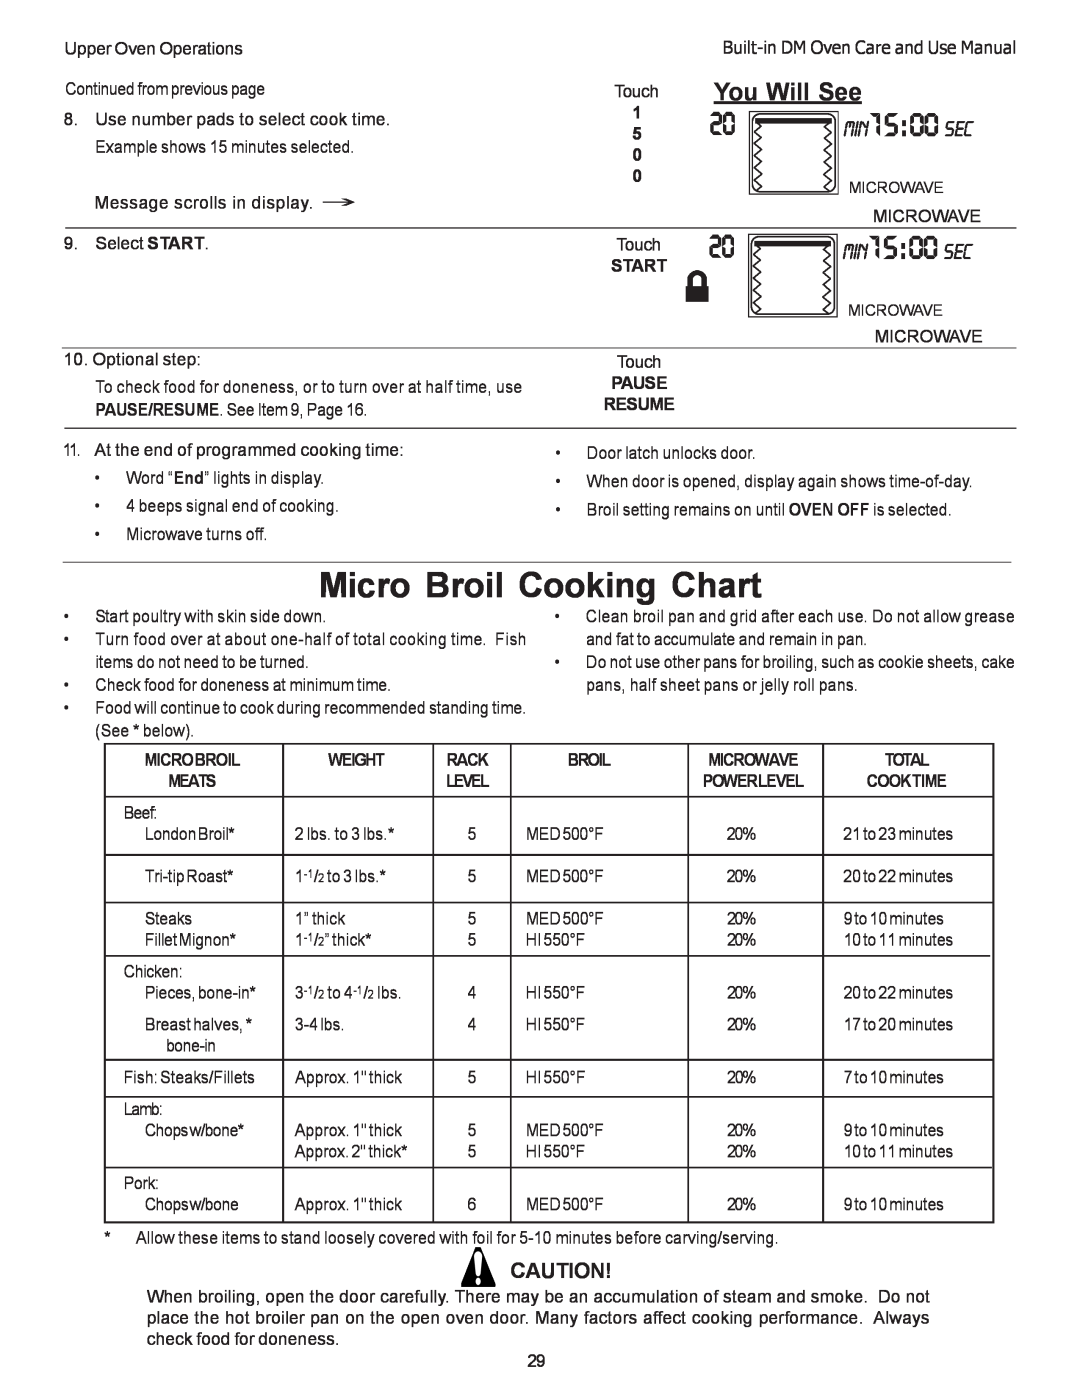 Thermador DM301, DM302 manual Micro Broil Cooking Chart, min 1500sec, You Will See 